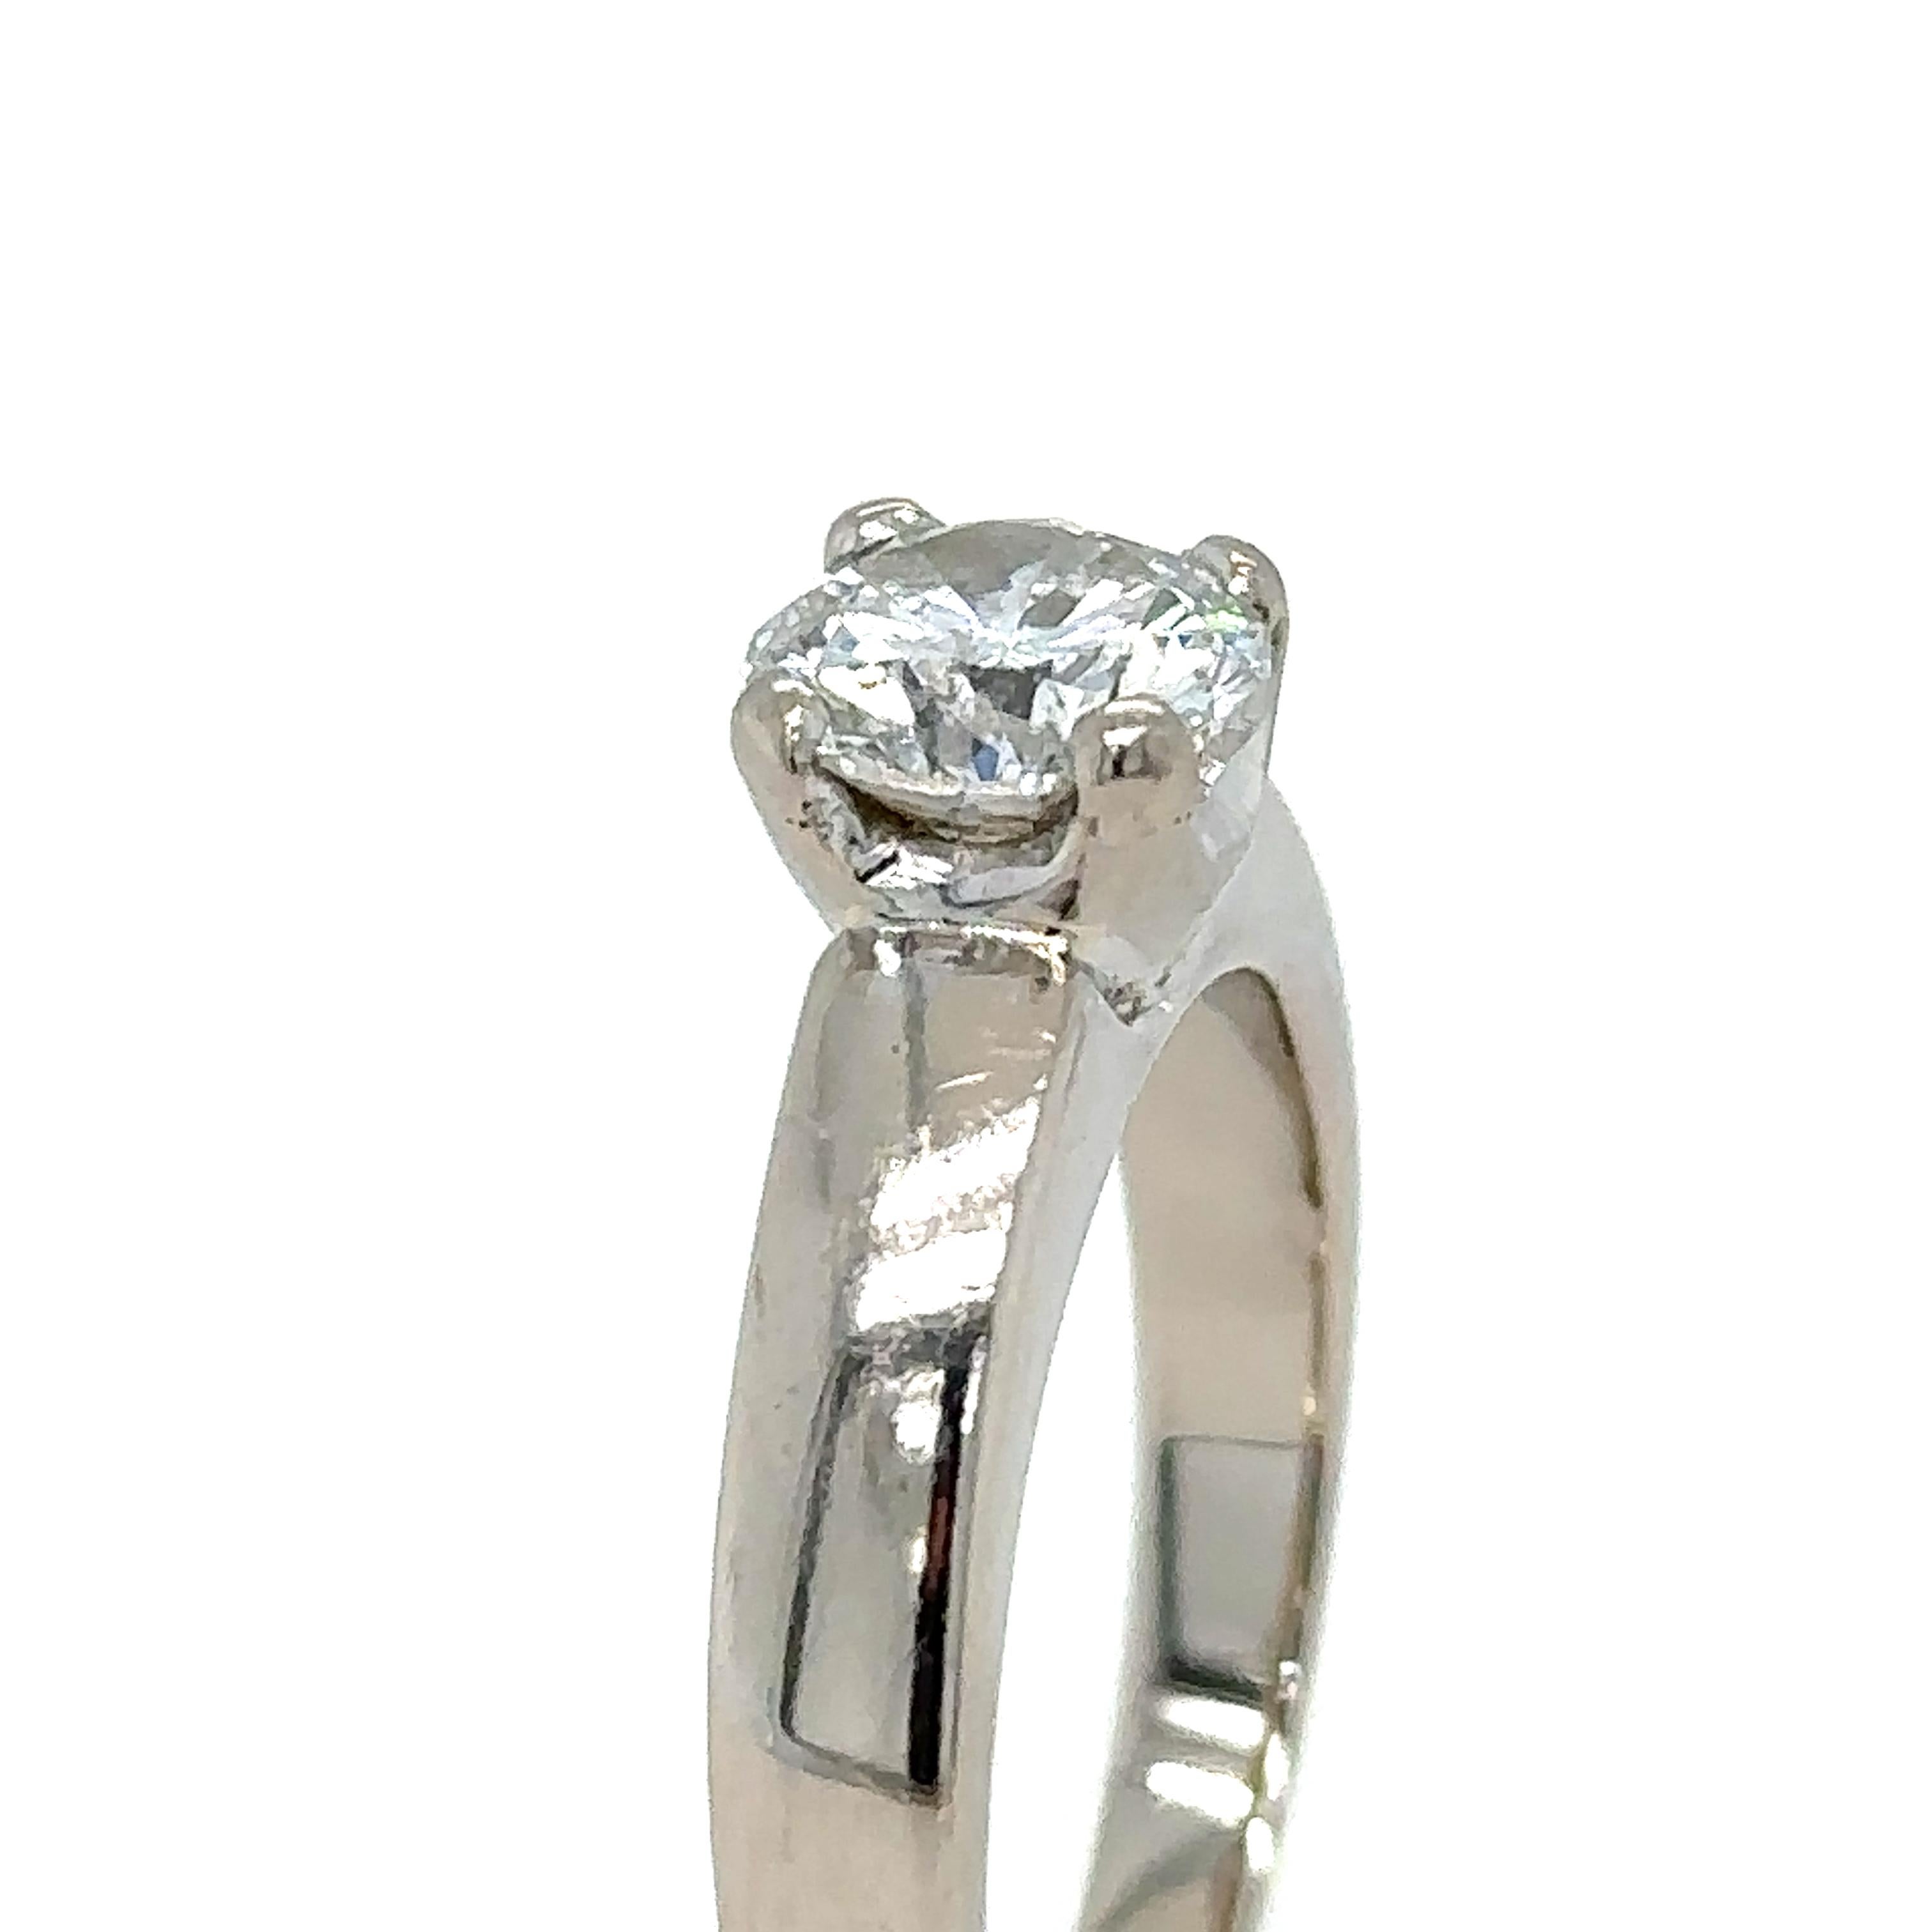 A Bespoke Diamond Engagement Ring, made of 18ct White Gold. Set with a Single Round Brilliant Cut Diamond, F colour, SI2 clarity, total carat weight of 1.56ct.

The diamond is certified HRD Antwerp certificate number 15015146001

Metal: 18ct White